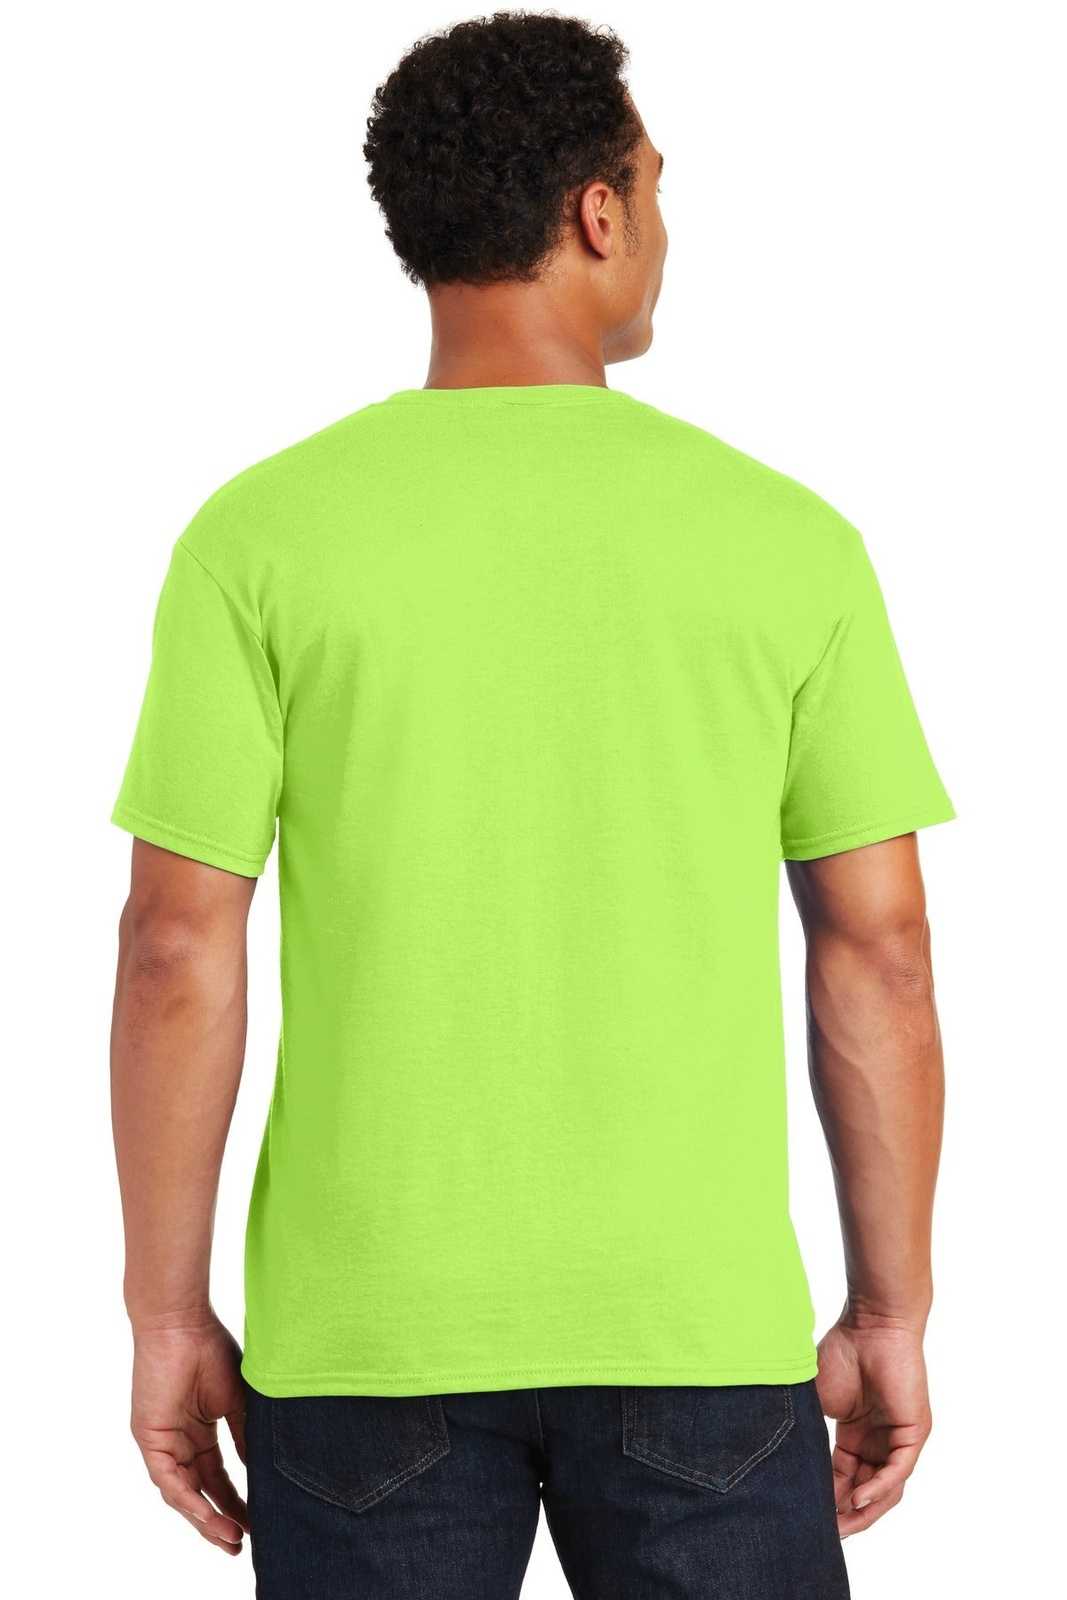 Jerzees 29M Dri-Power Active 50/50 Cotton/Poly T-Shirt - Neon Green - HIT a Double